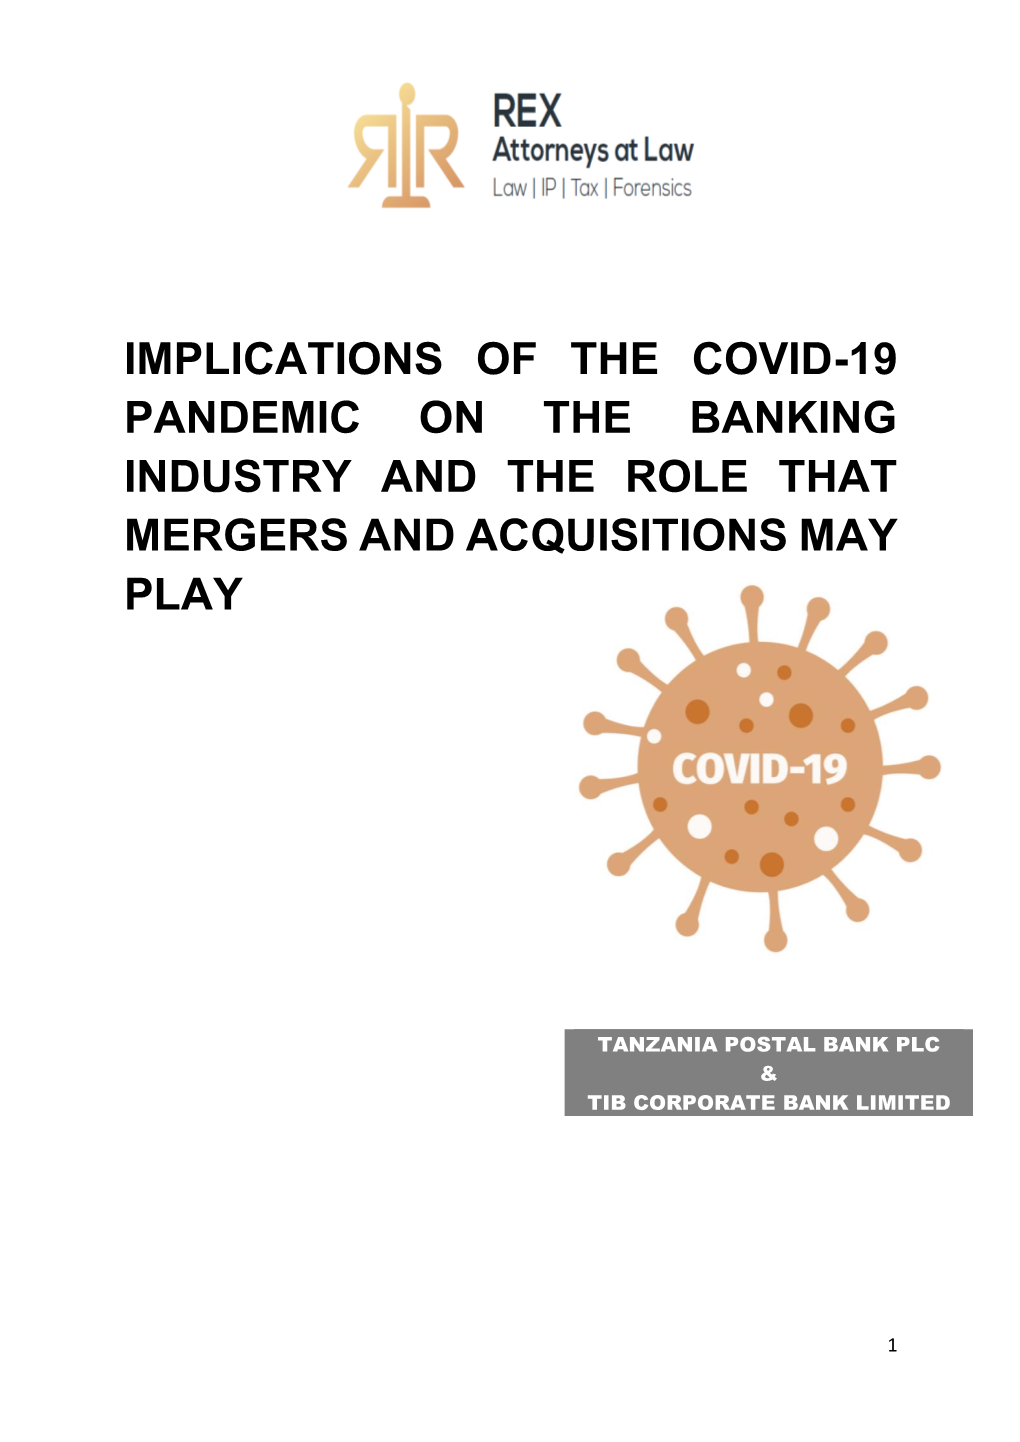 Implications of the Covid-19 Pandemic on the Banking Industry and the Role That Mergers and Acquisitions May Play